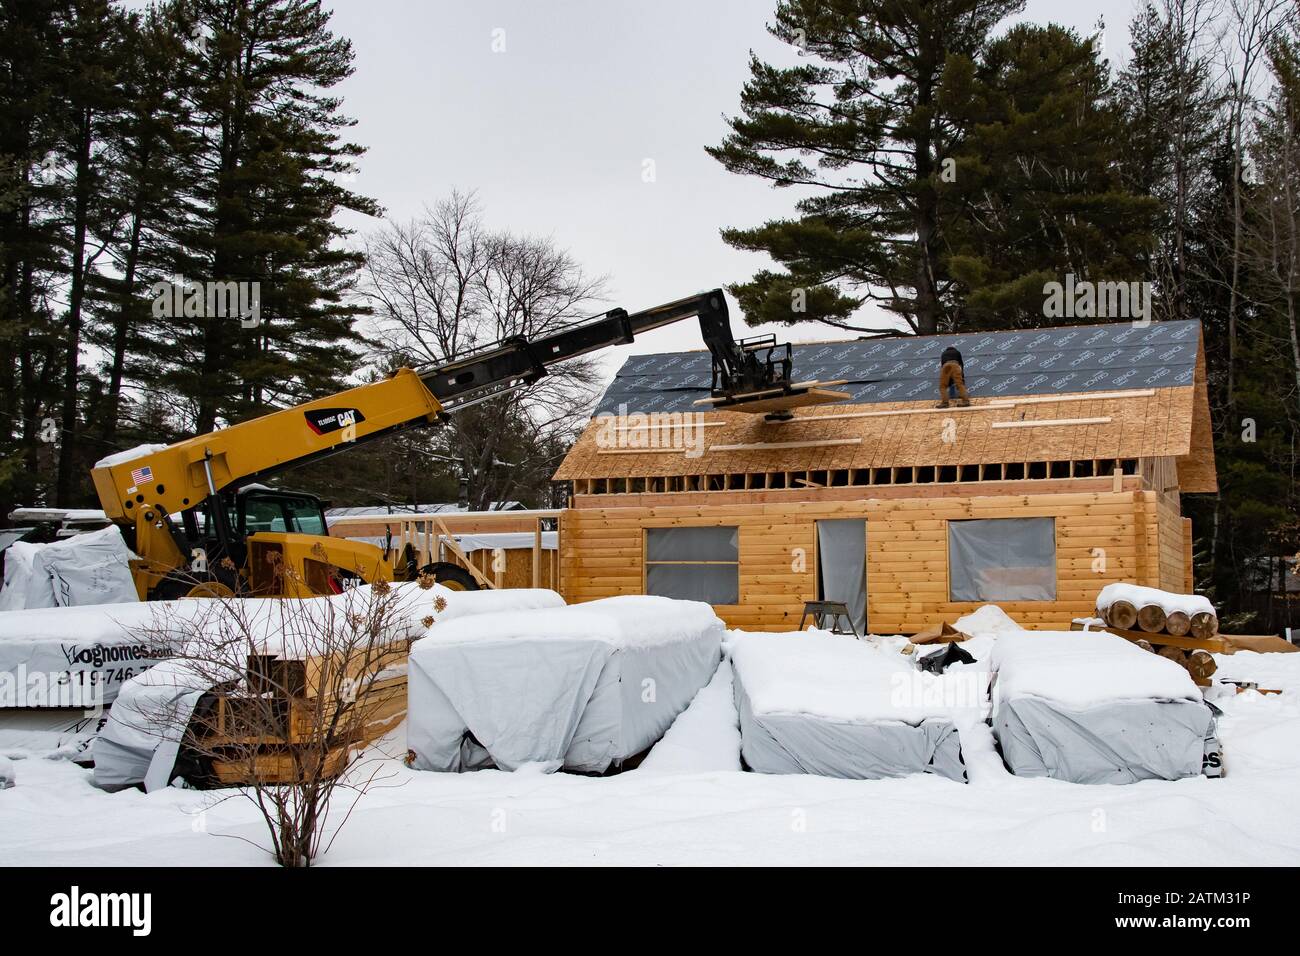 Two construction workers installing a roof covering on a manufactured log home in winter with a Cat TL1055C Telehandler in Speculator, NY USA . Stock Photo